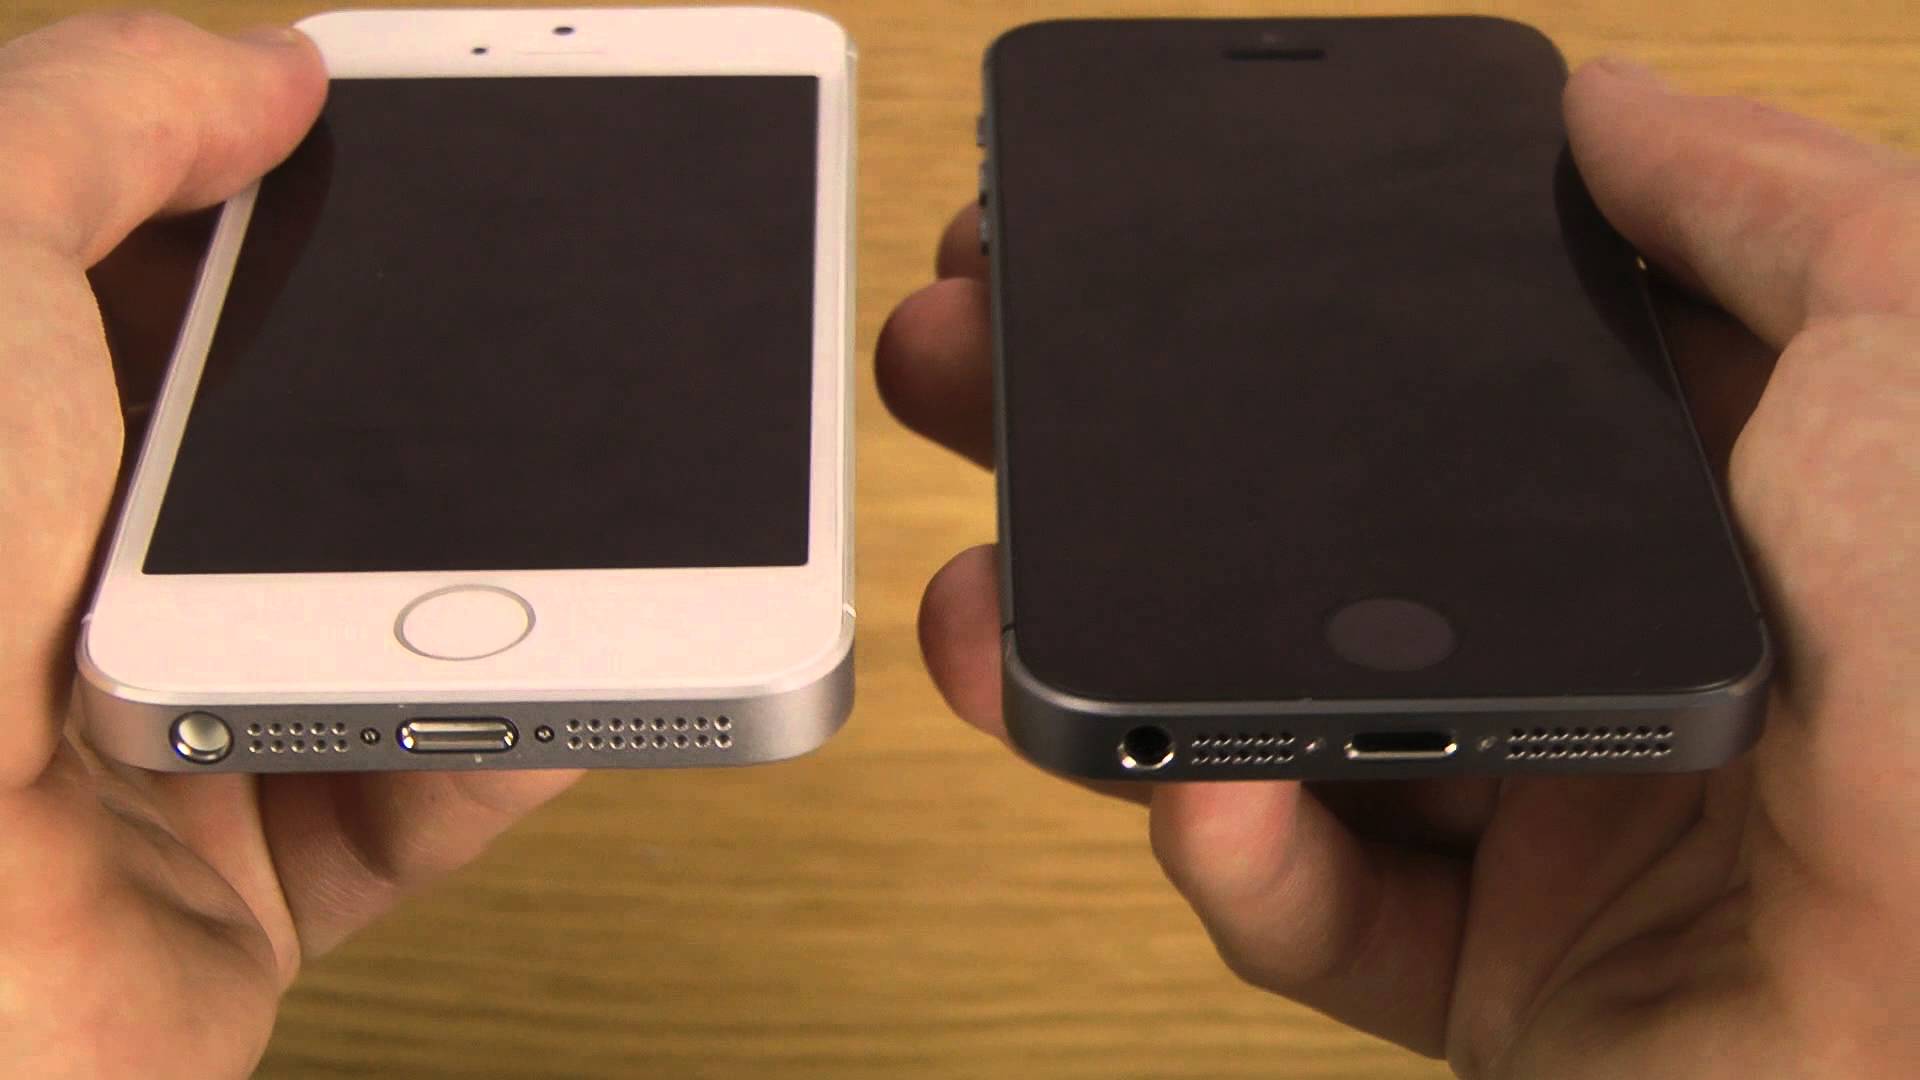 iPhone 5S: White or Black? - YouTube